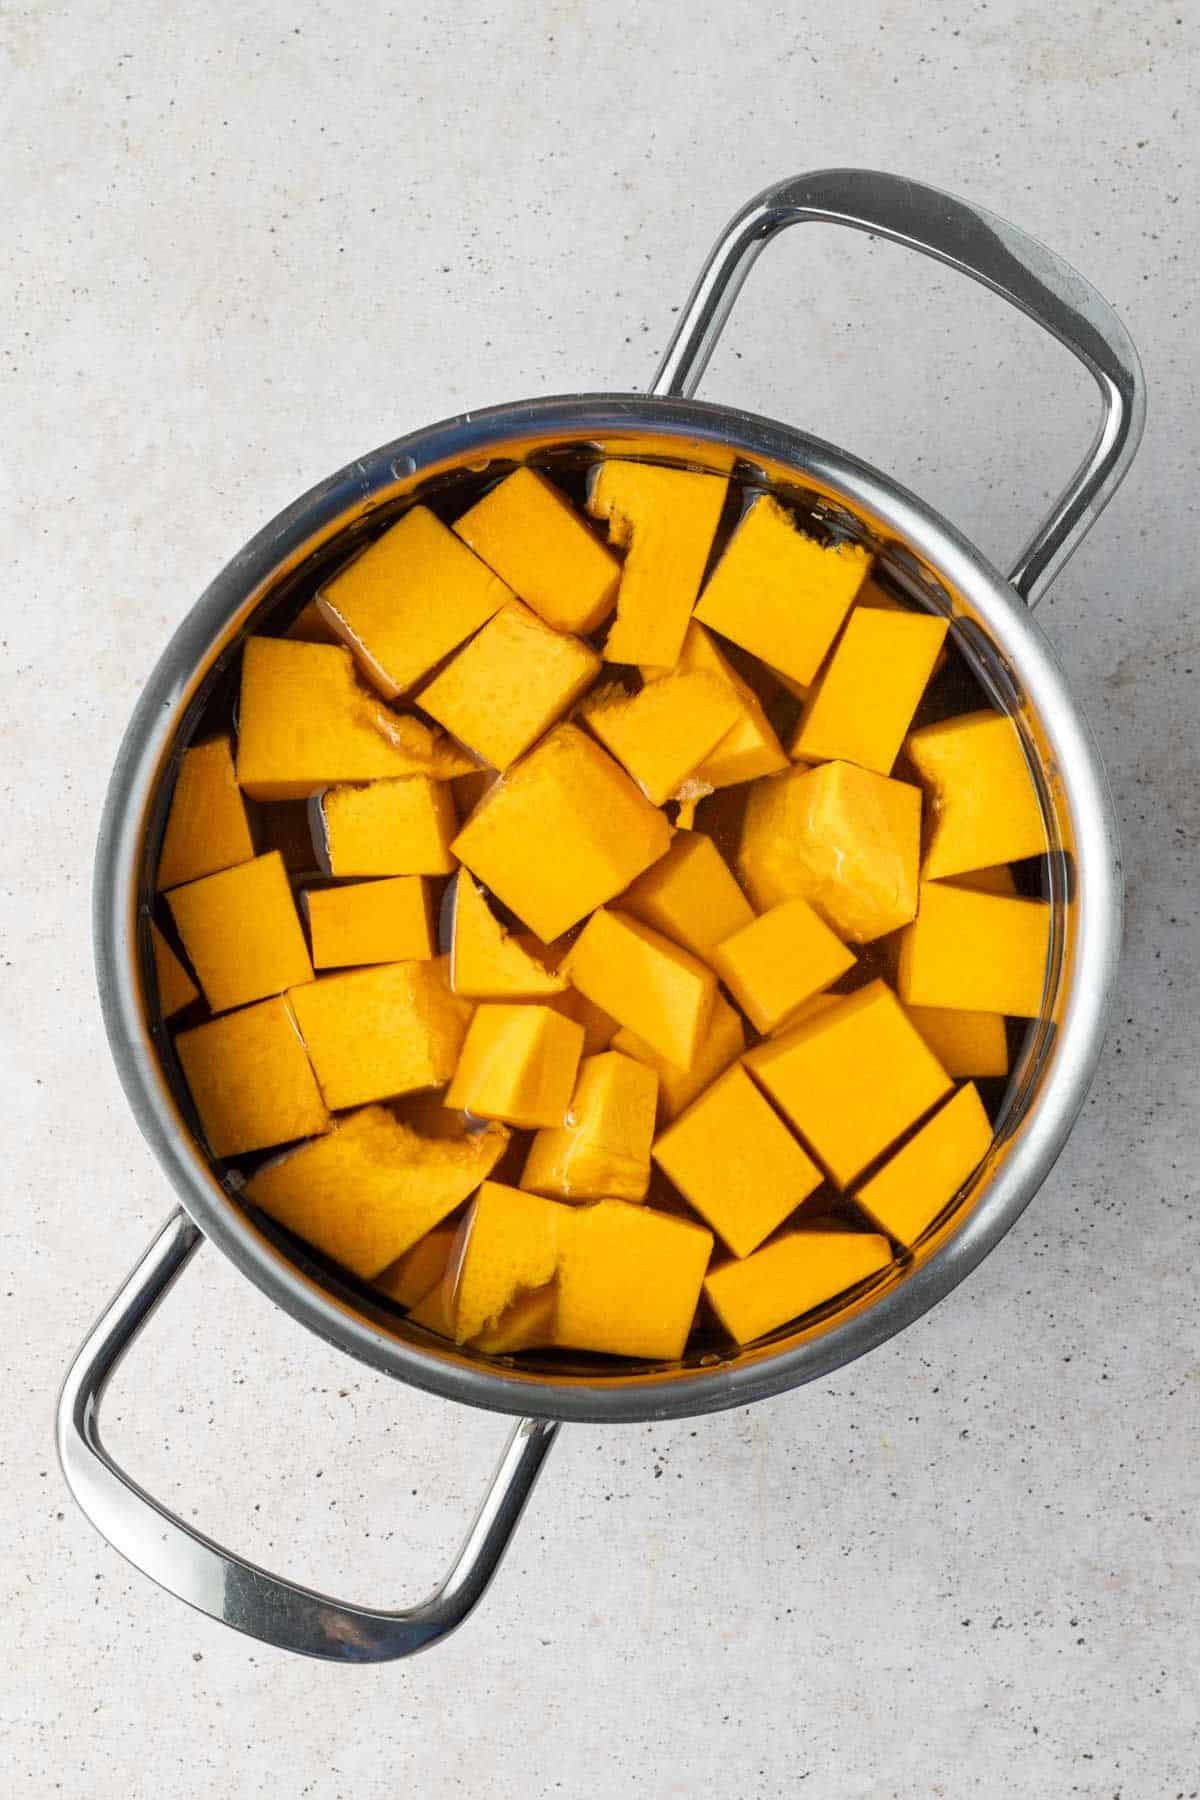 Saucepan full of water with cut pieces of pumpkin ready to be cooked.